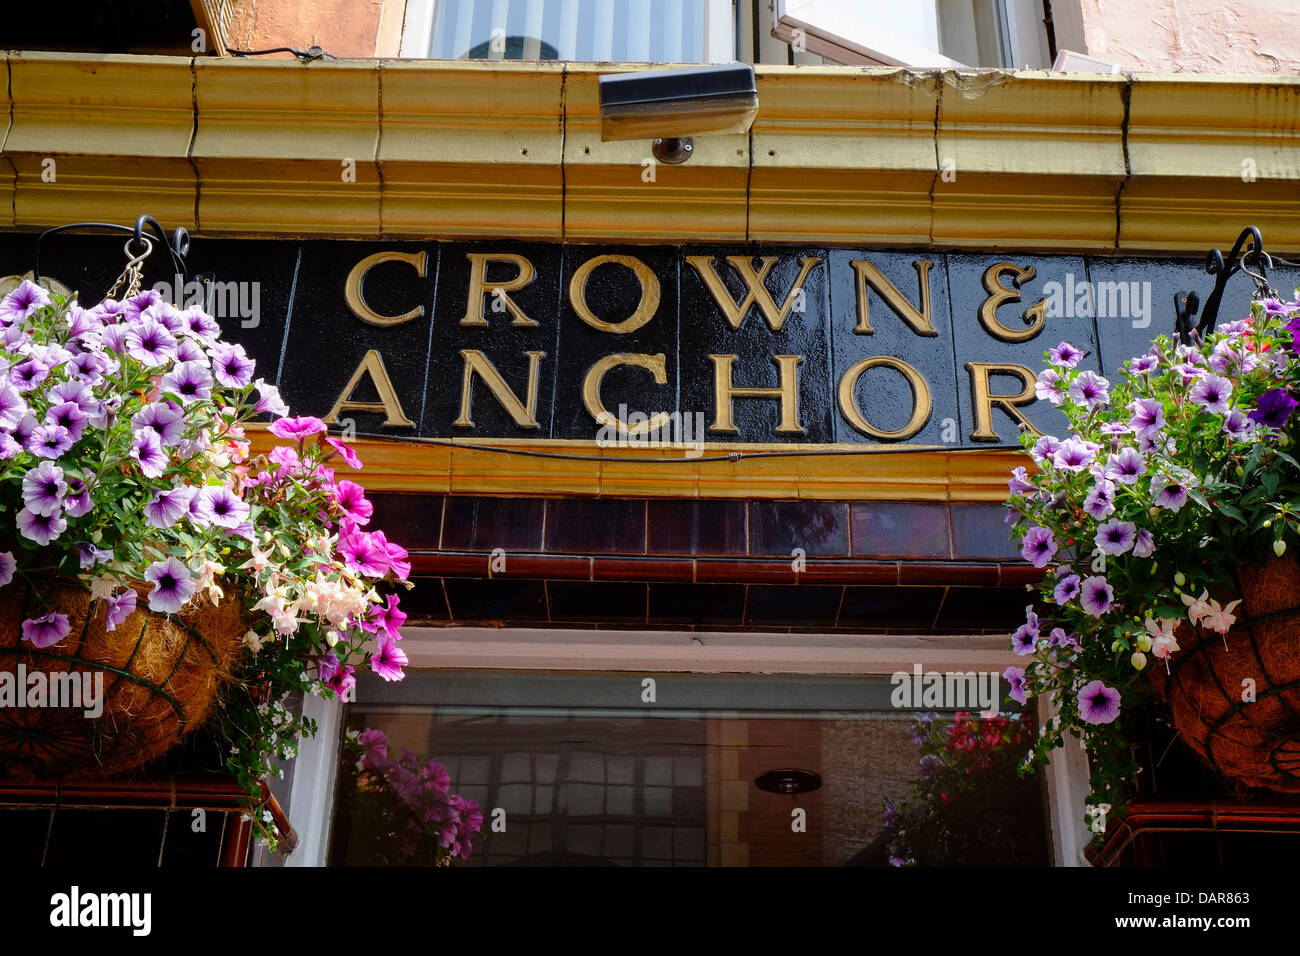 England, Manchester, hanging baskets outside the Crown & Anchor Public house Stock Photo